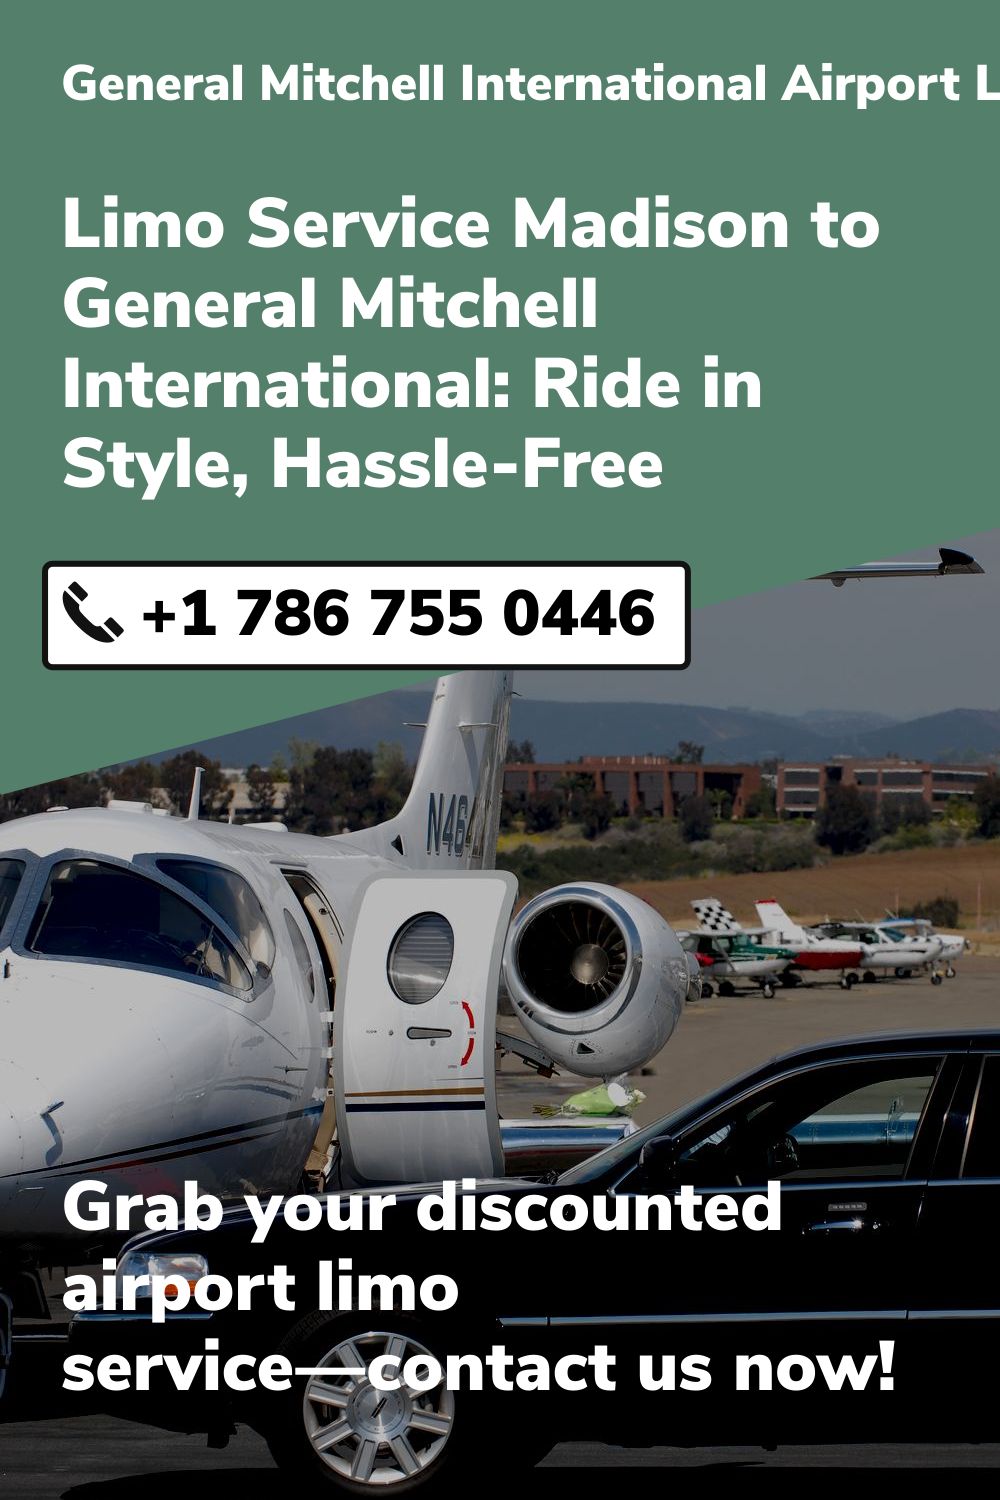 General Mitchell International Airport Limo